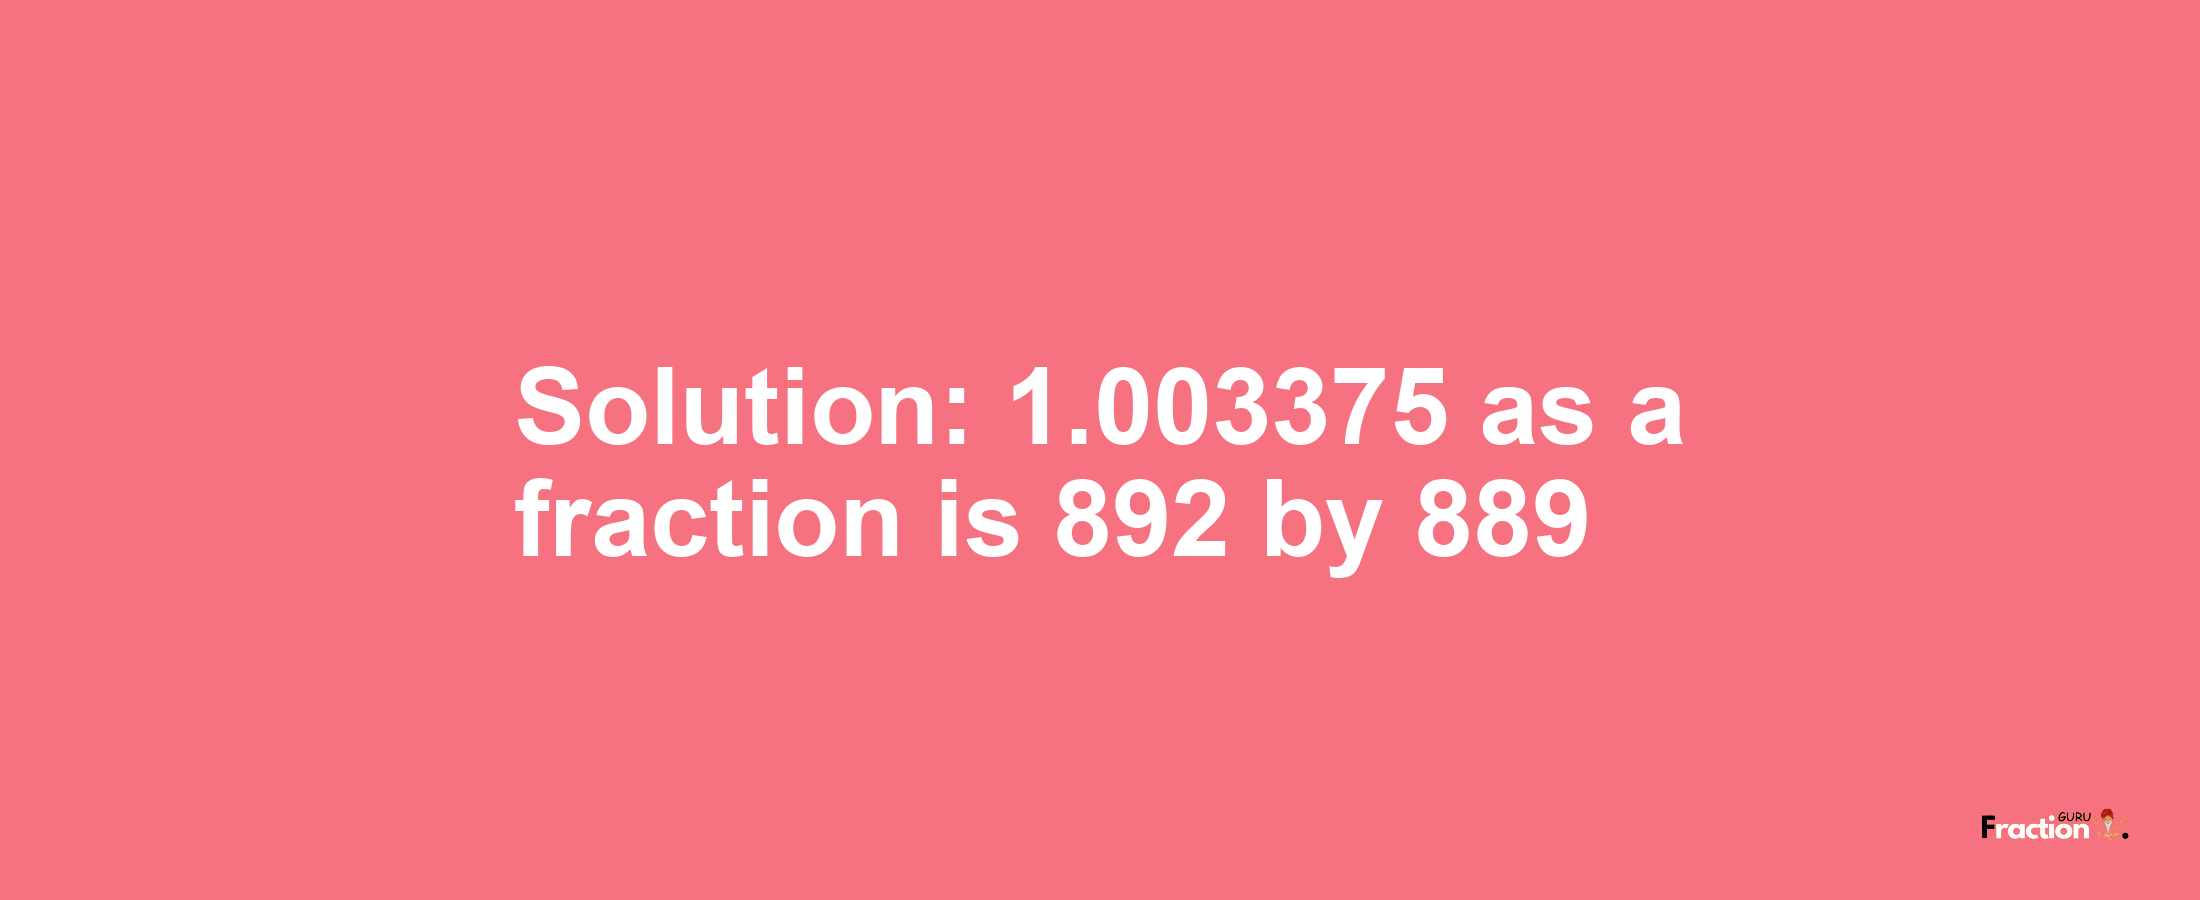 Solution:1.003375 as a fraction is 892/889